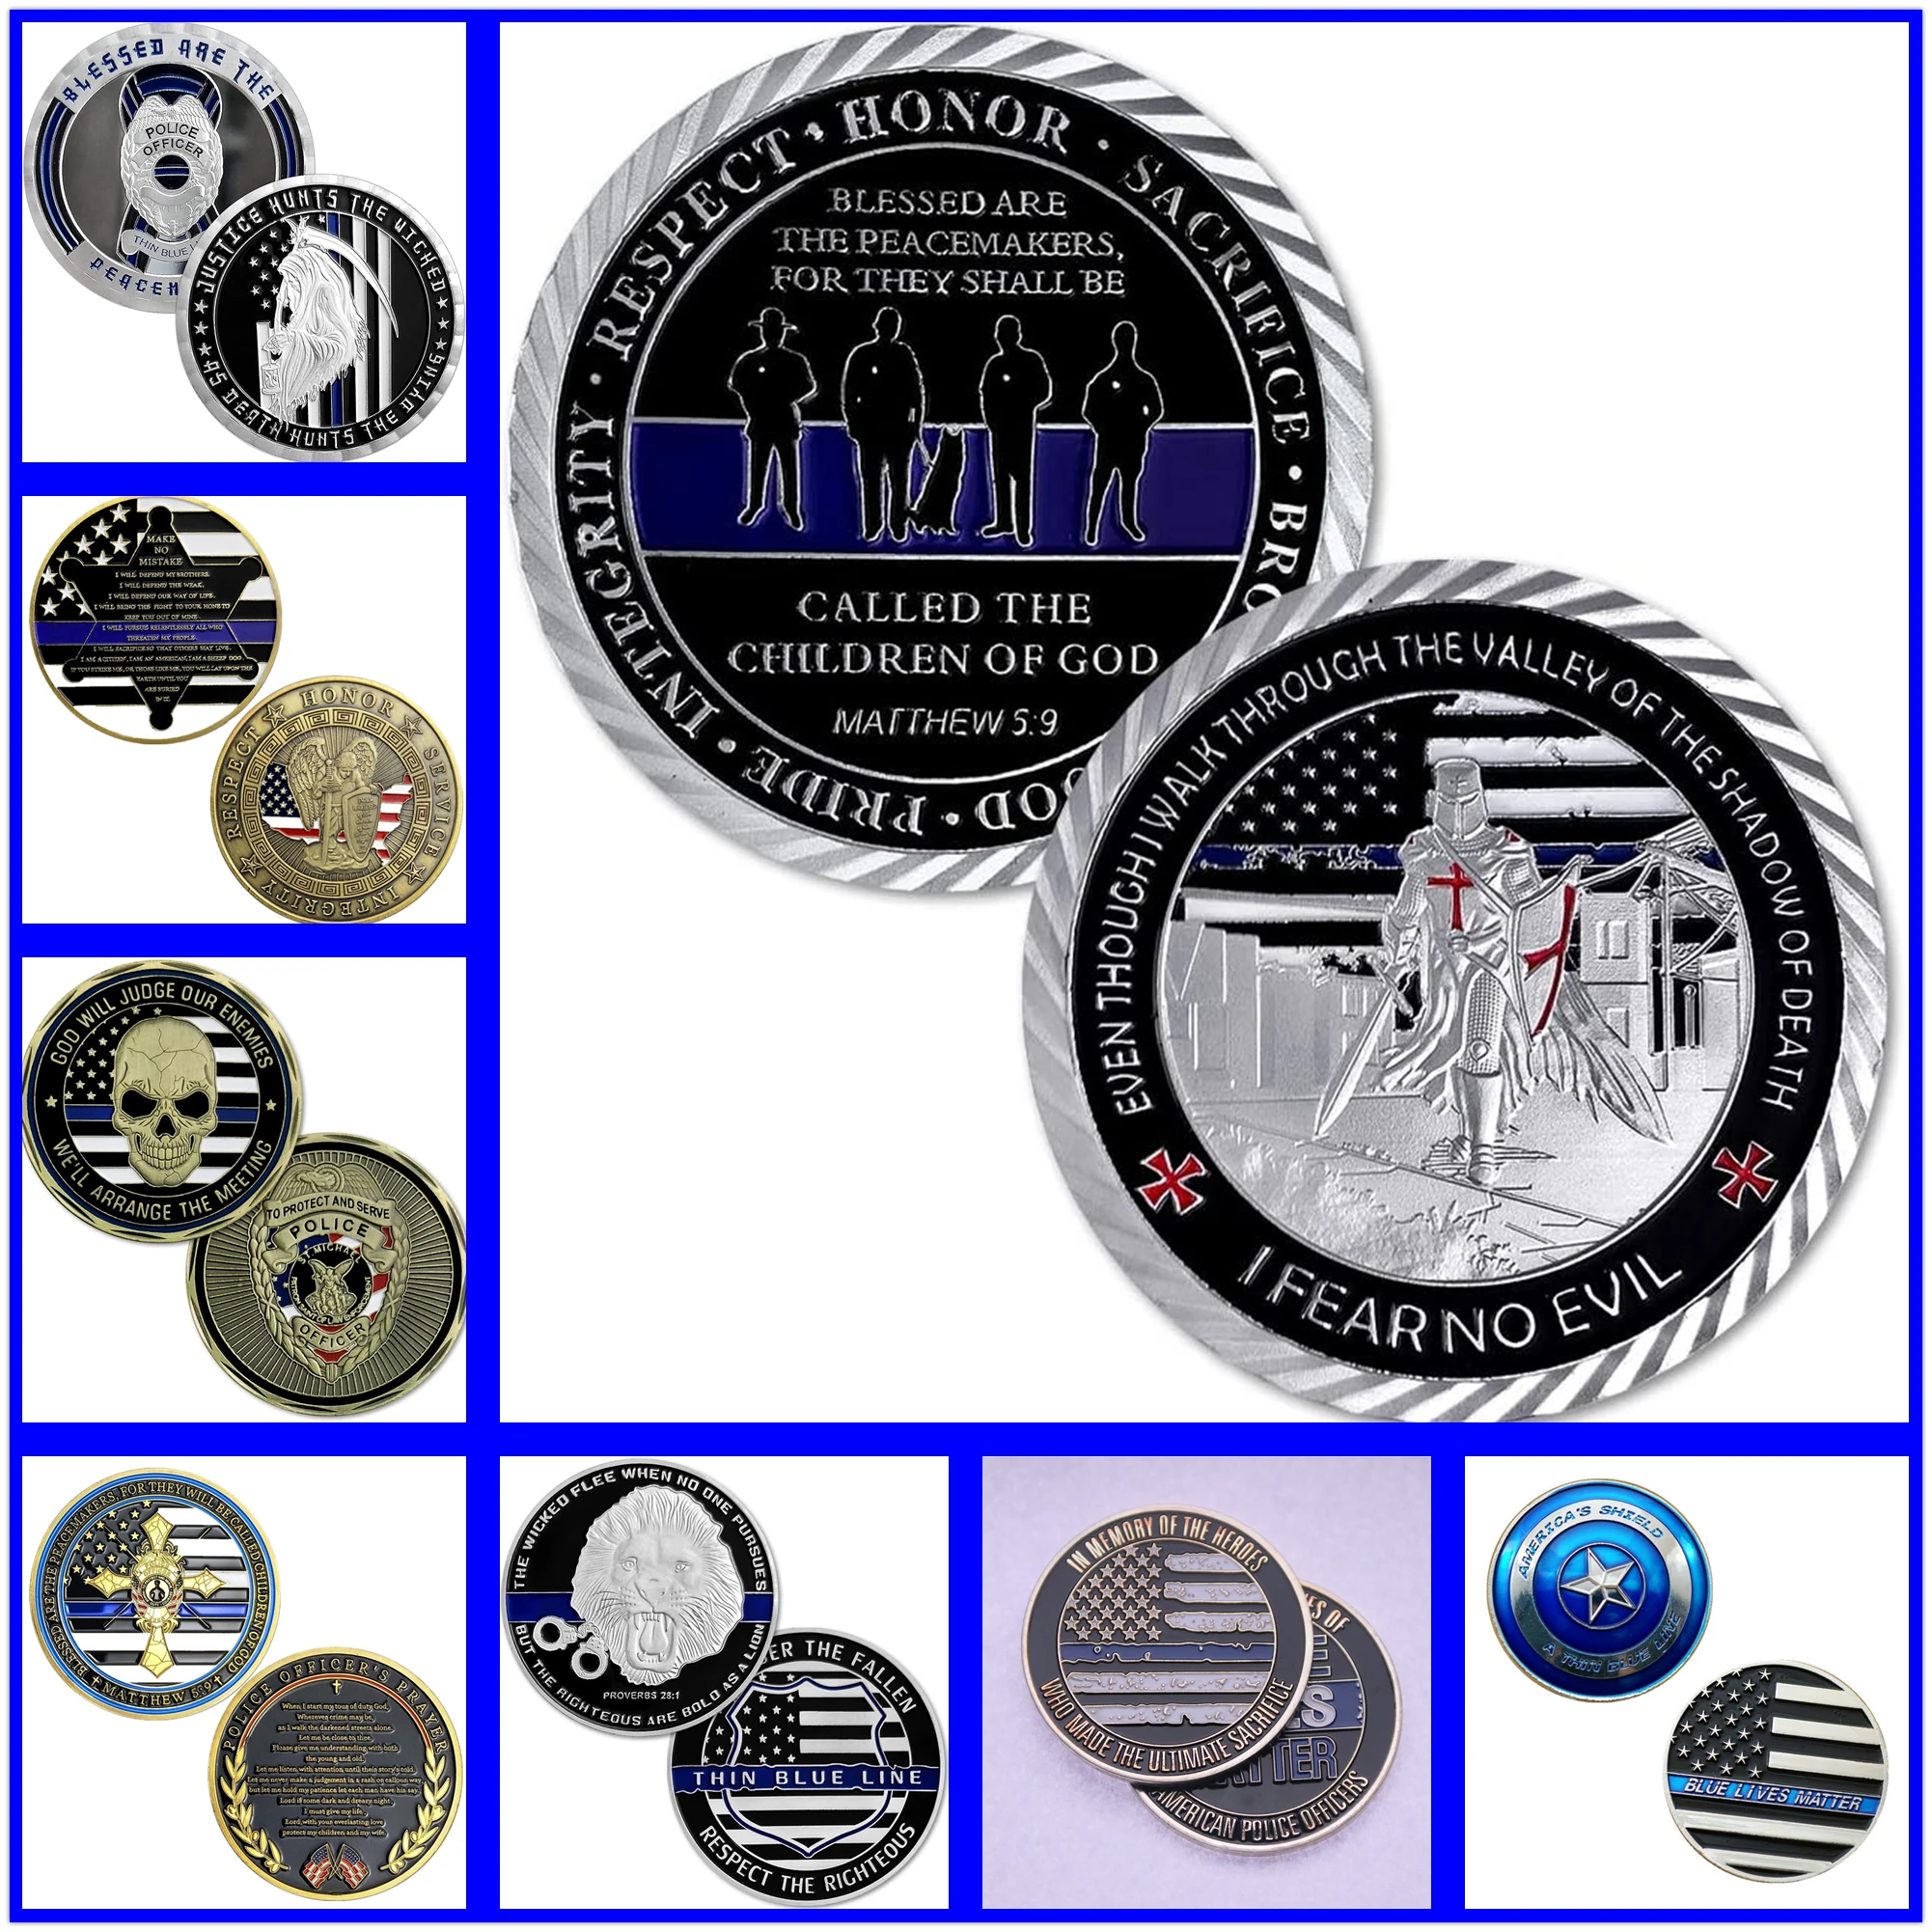 20 US Military Challenge Coins Mixed Random Shipping Beautiful Gift Collectibles Commemorative Coin Badges